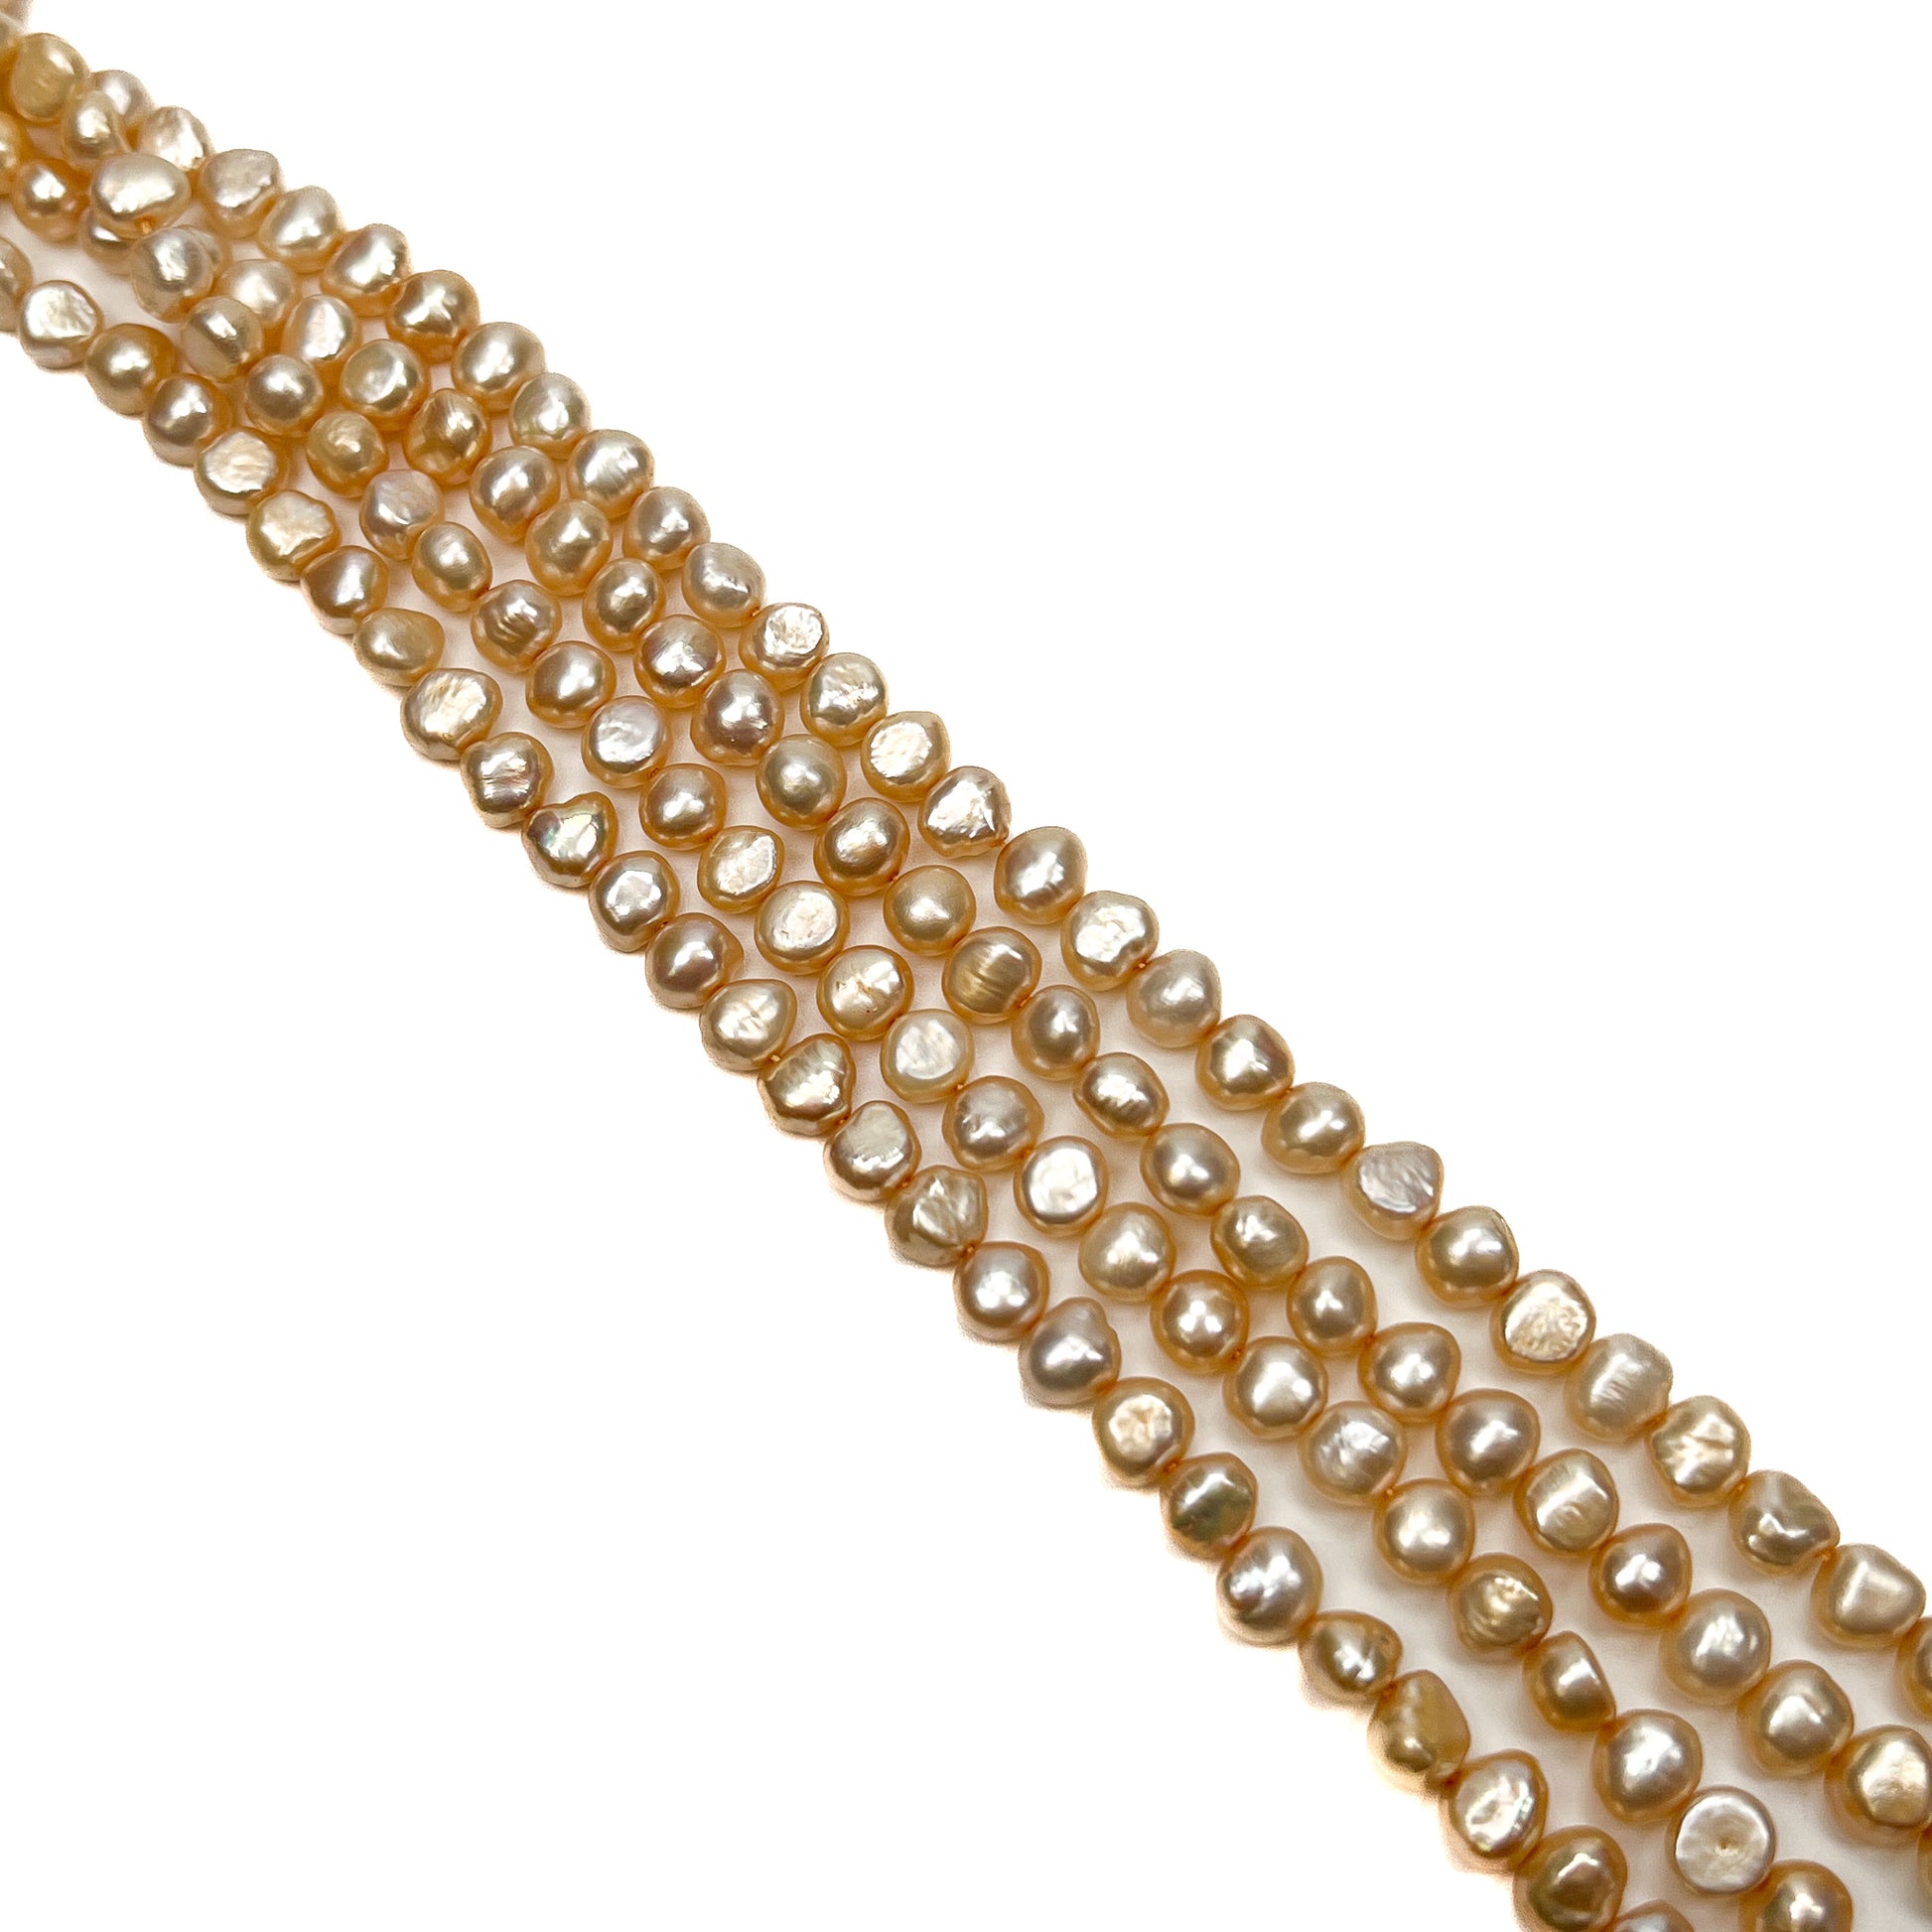 Medium Champagne 8mm Side-Drilled Nugget Freshwater Pearl Bead - 8" Strand